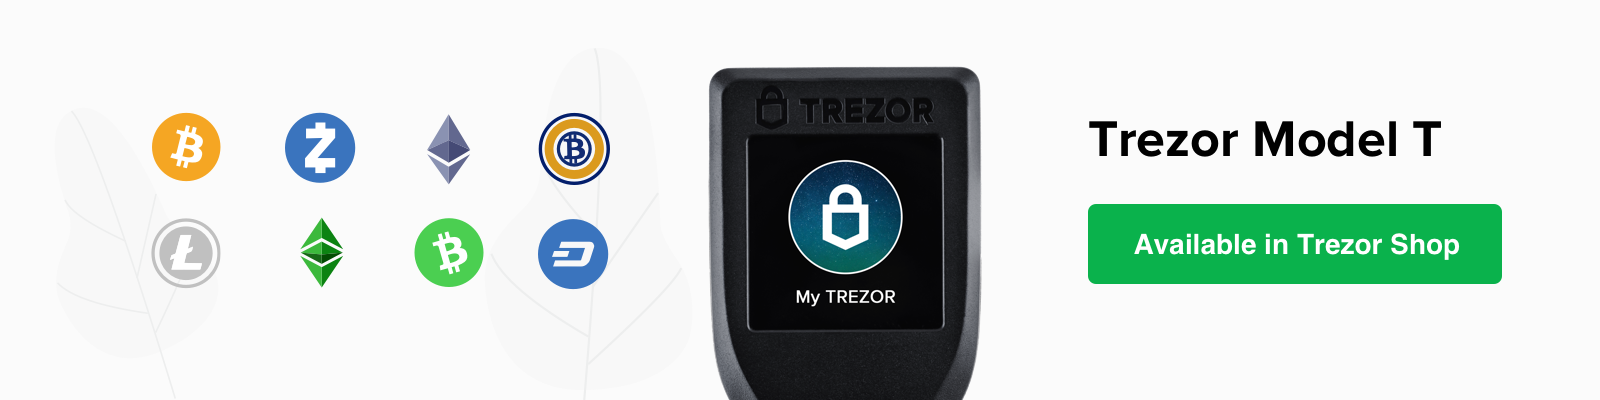 Trezor Hardware Wallet - The original and most secure hardware wallet. Discover the secure vault for your digital assets. Store bitcoins, litecoins, passwords, logins, and keys without worries